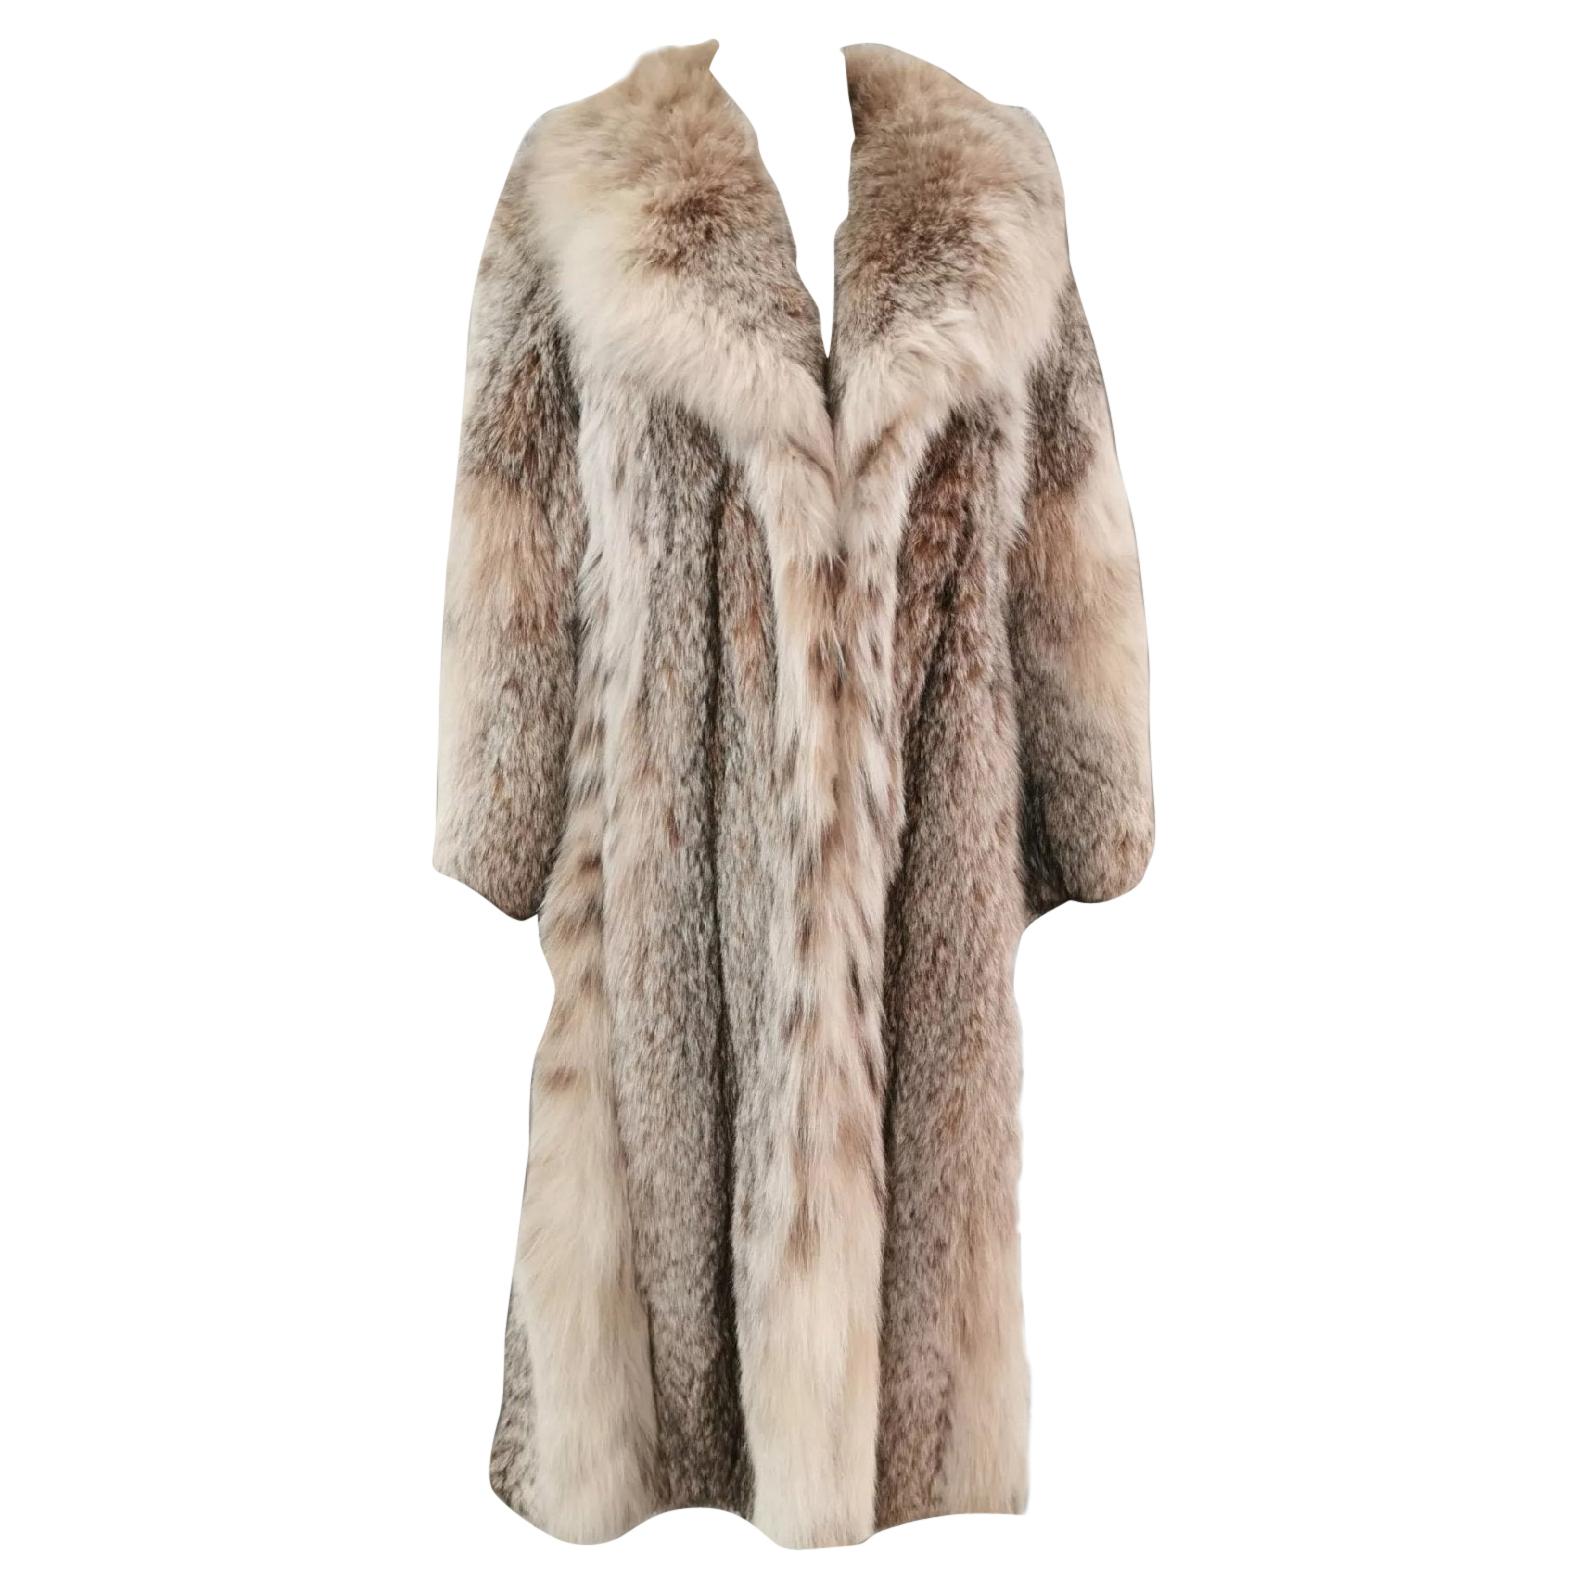 Brand new Canadian Lynx Fur Coat (Size 12 - M) For Sale